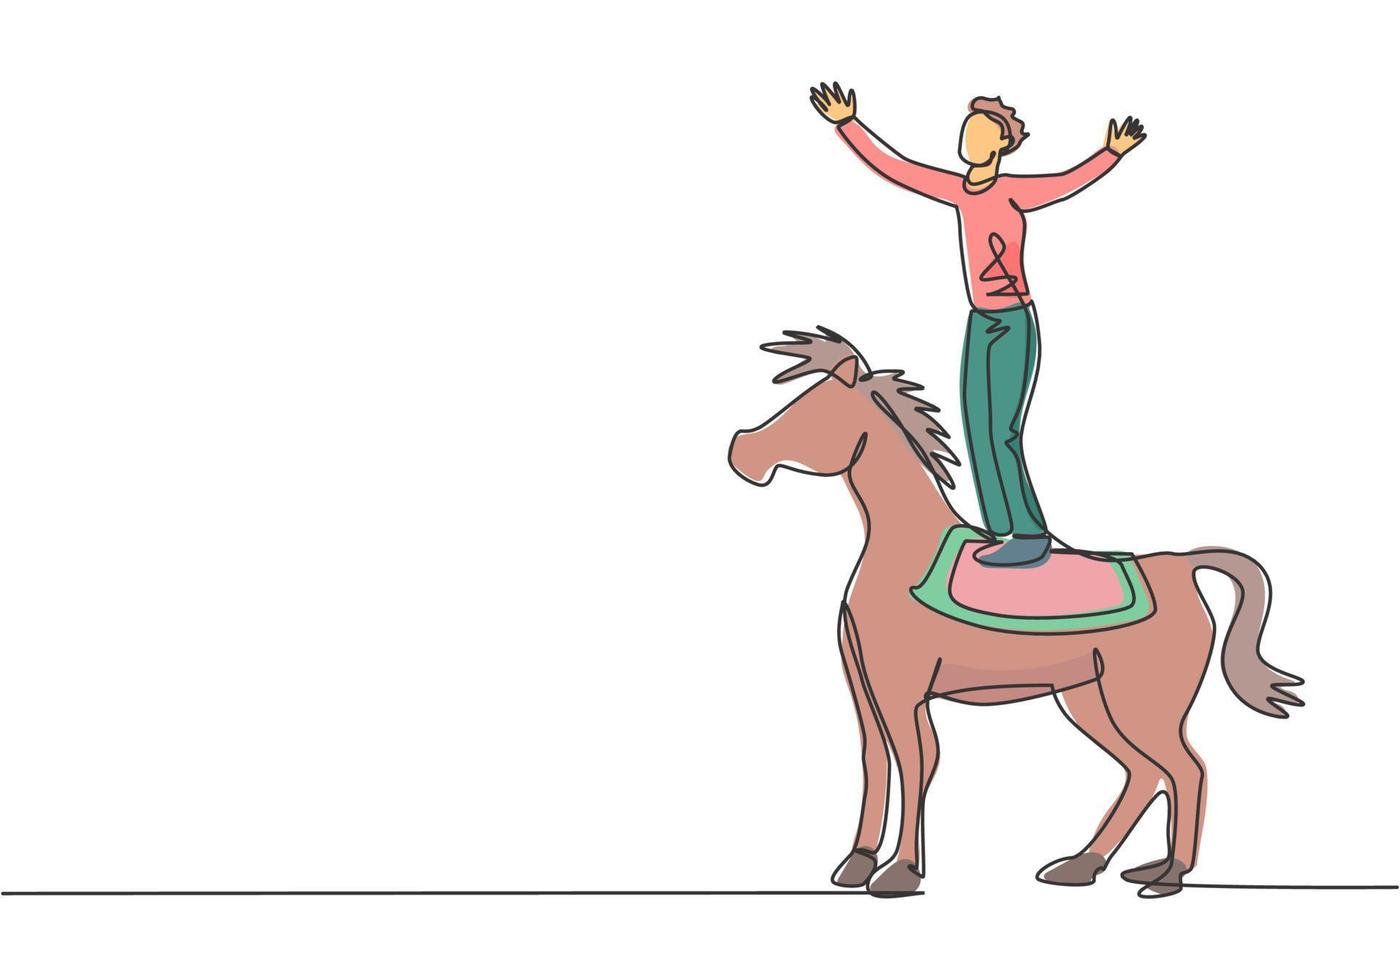 Single continuous line drawing a male acrobat performs a stunt on a circus horse by standing on the horse's back and raising his hands. Dynamic one line draw graphic design vector illustration.